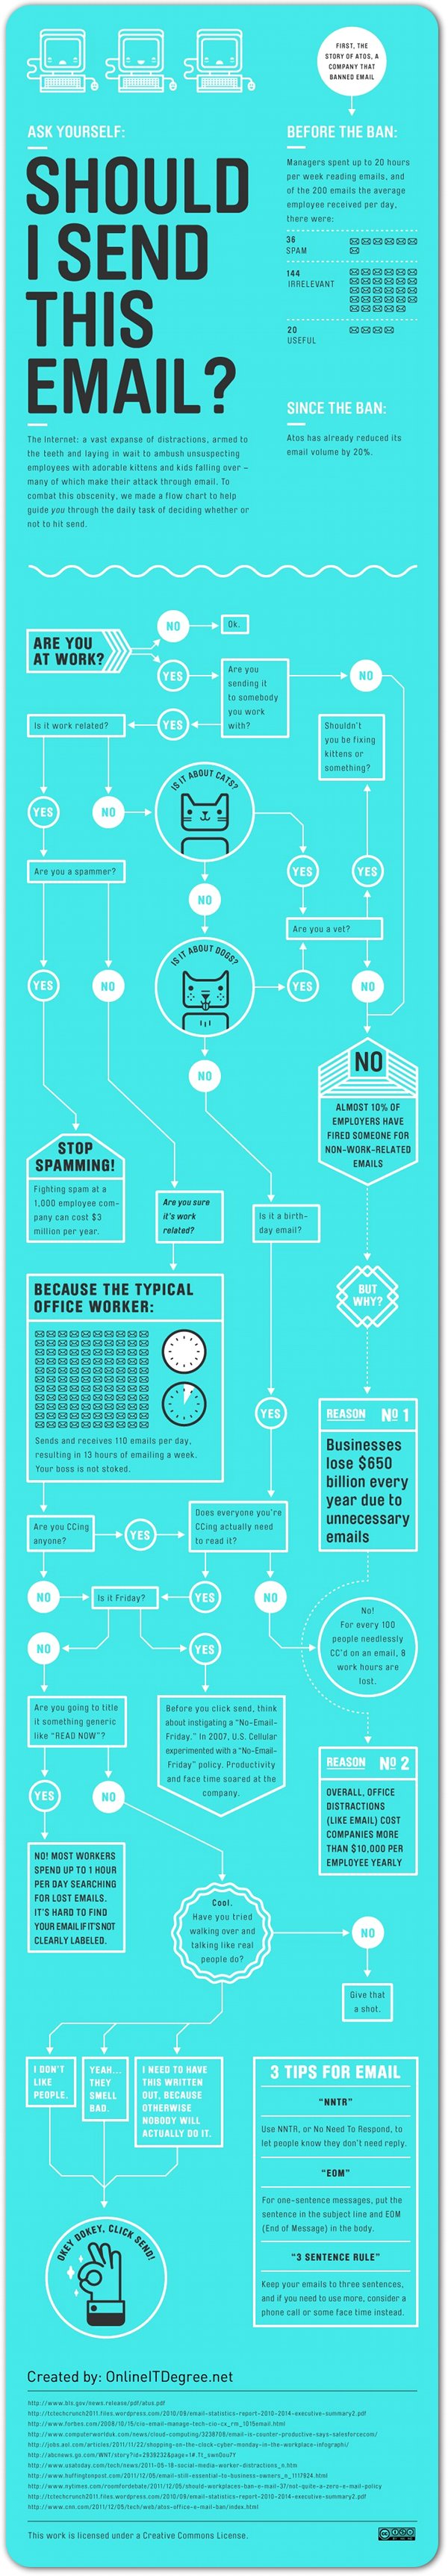 email-overload-infographic